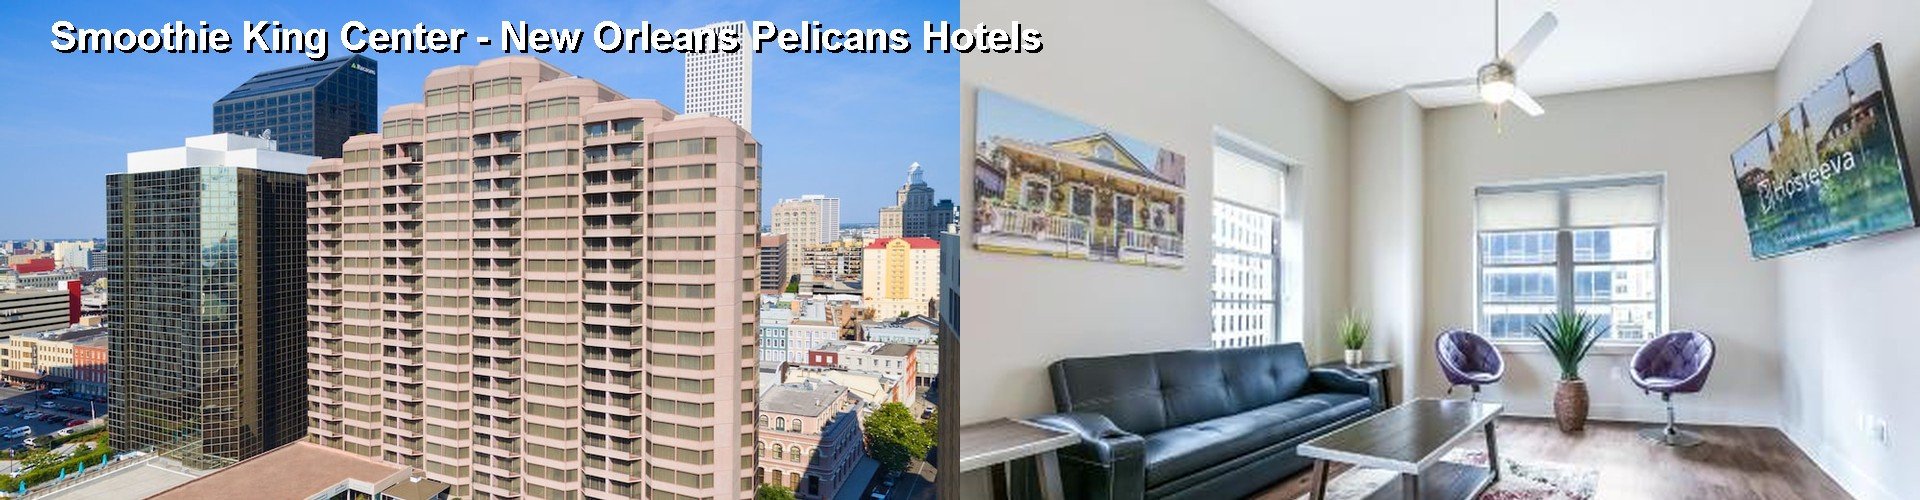 $45+ EXCELLENT Hotels Near Smoothie King Center